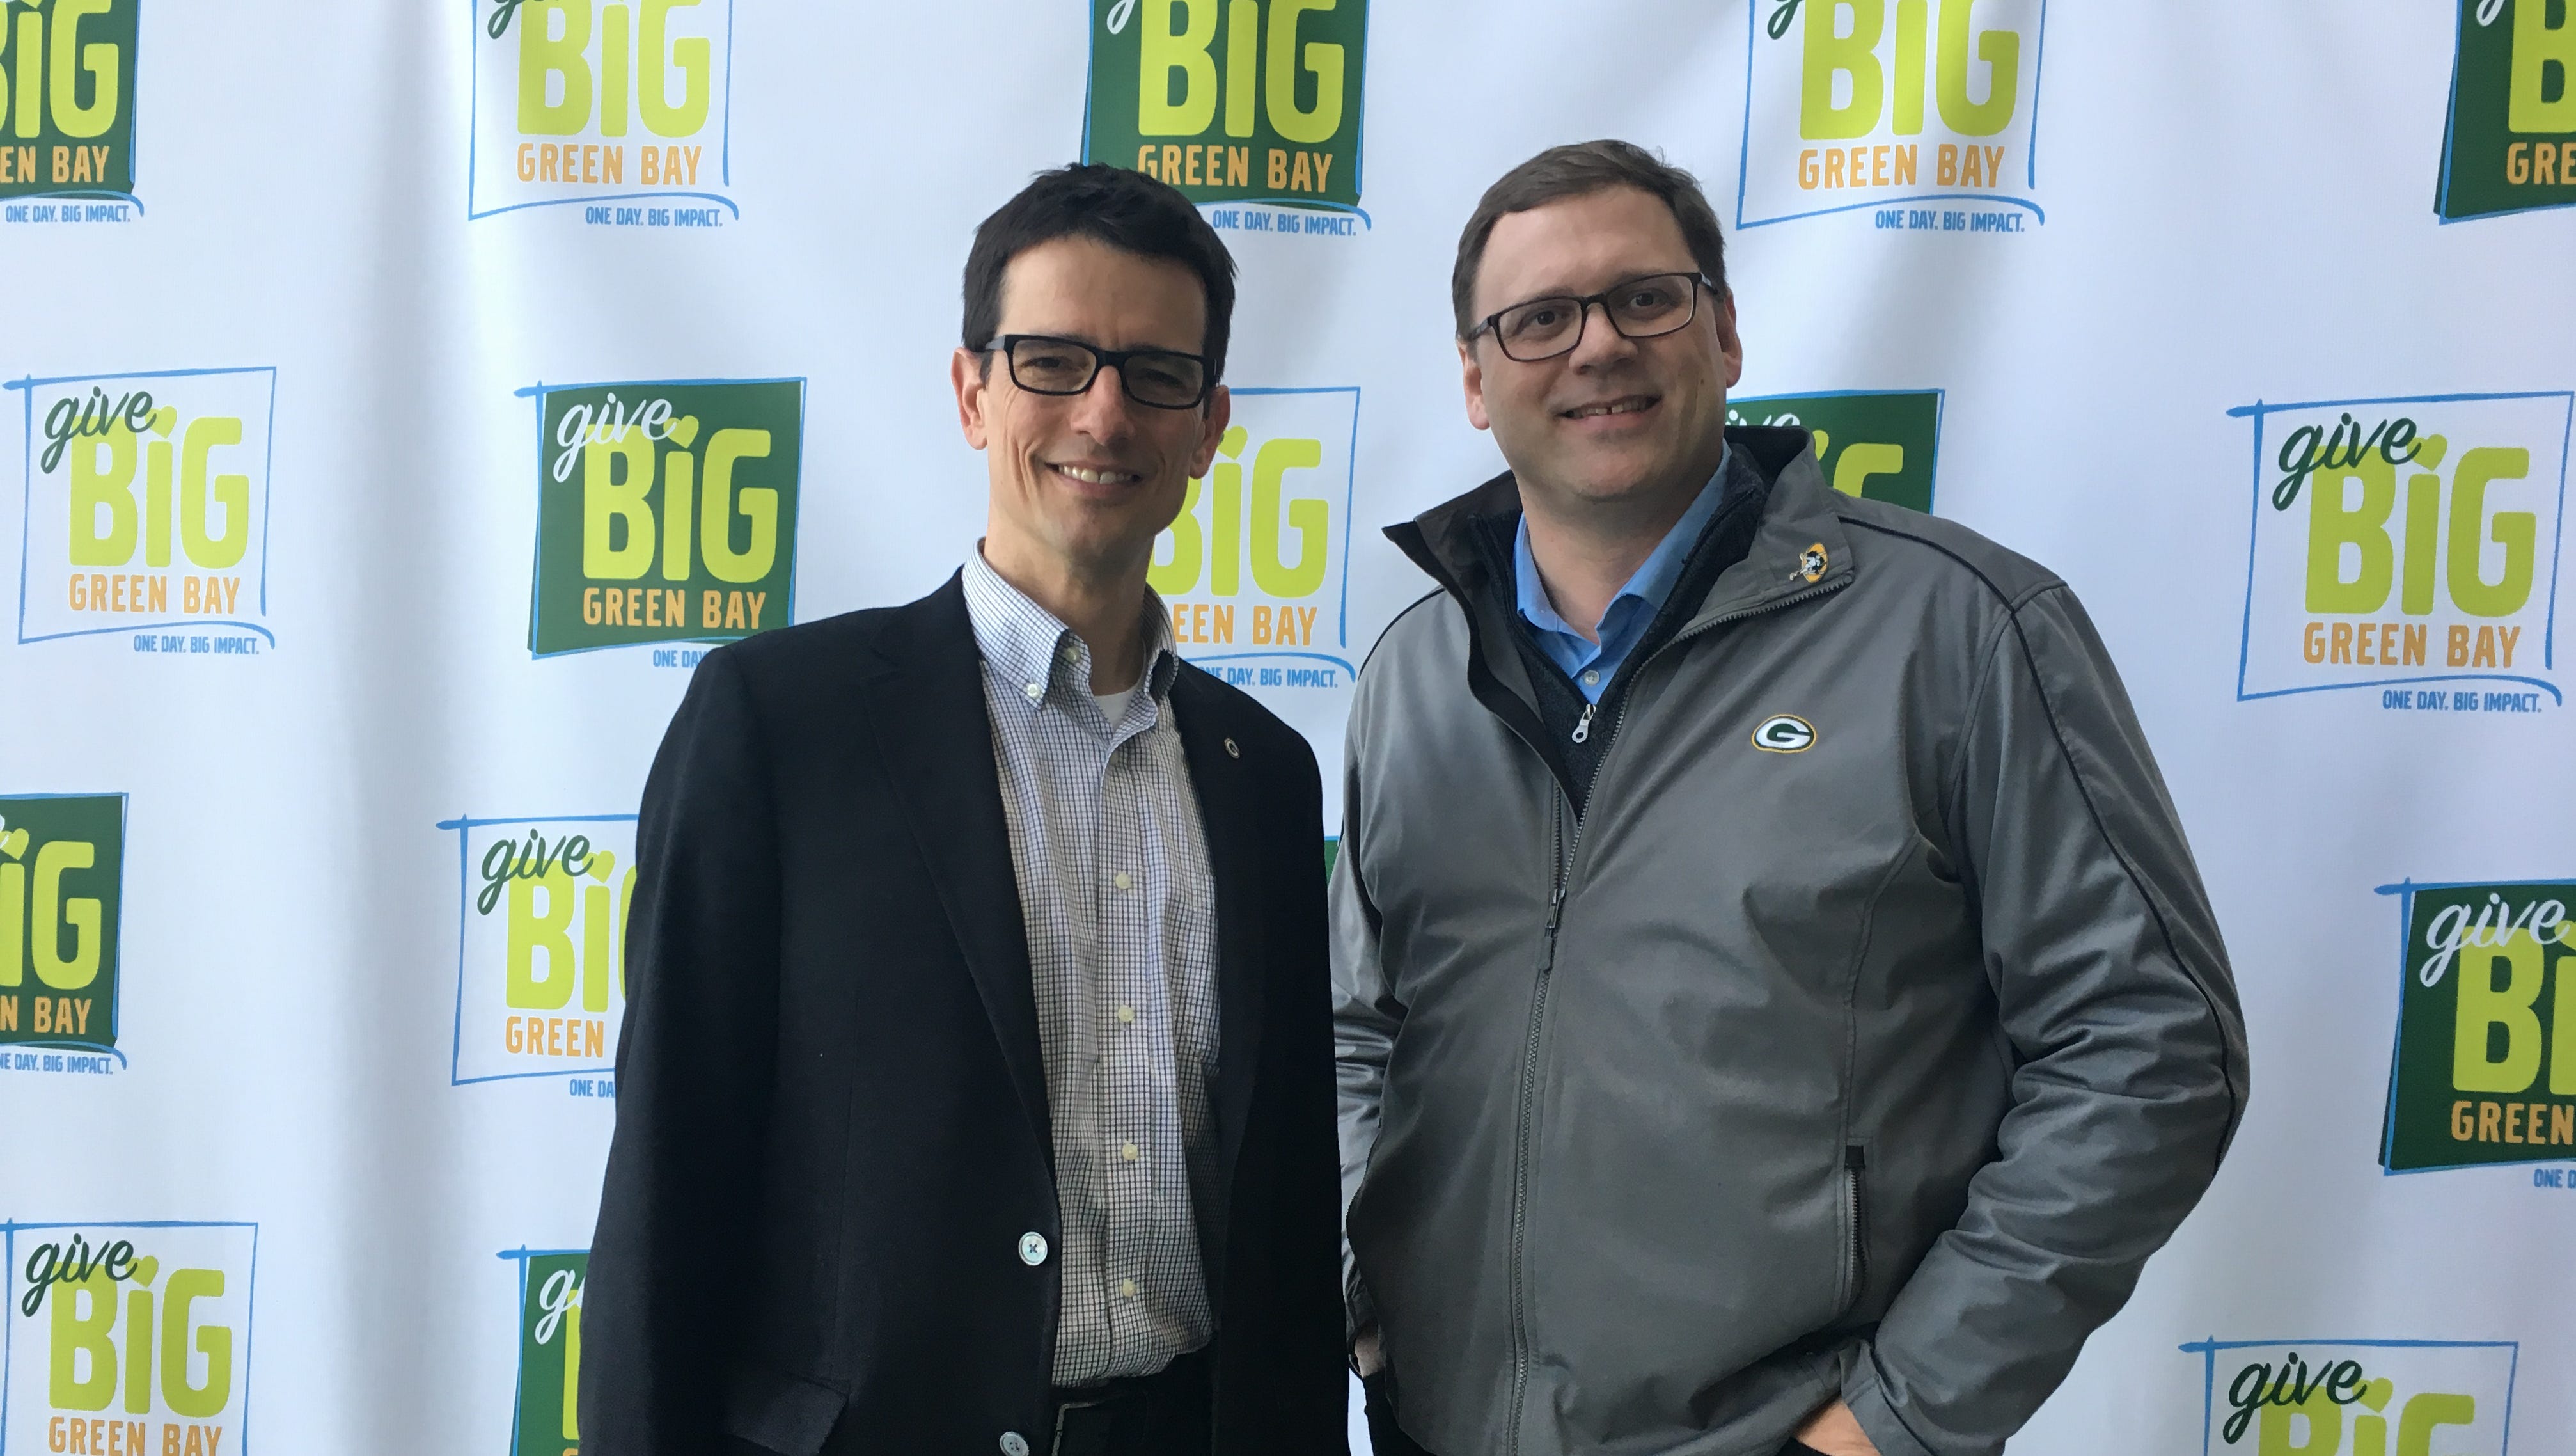 Green Bay Packers Director of Public Affairs Aaron Popkey, left, and Dennis Buehler, president of the Greater Green Bay Community Foundation at the end of the 24-hour Give Big Green Bay fundraiser.